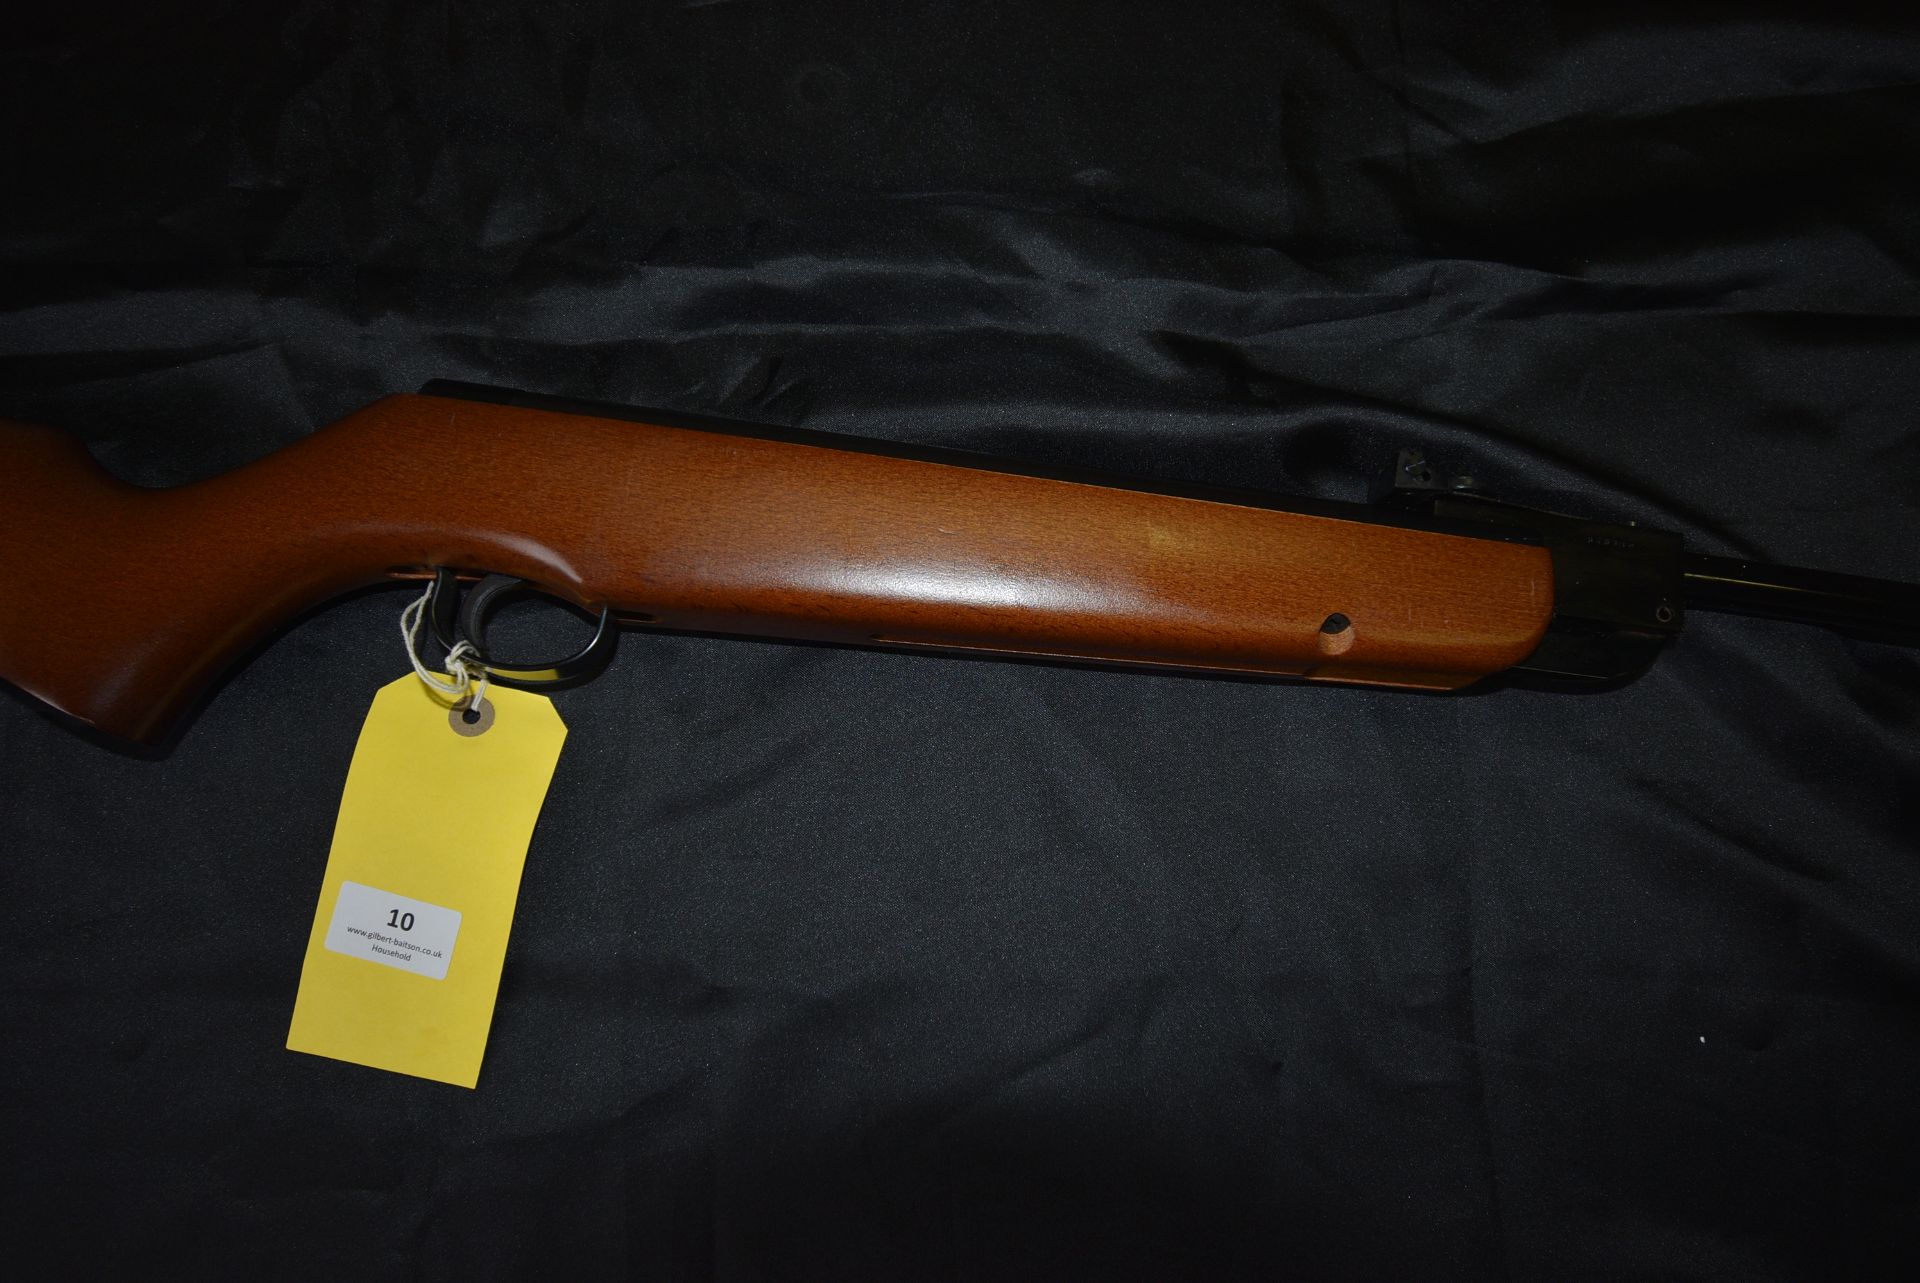 Webley & Scott Limited Excel 22 Air Rifle Serial No. 848339 - Image 4 of 4